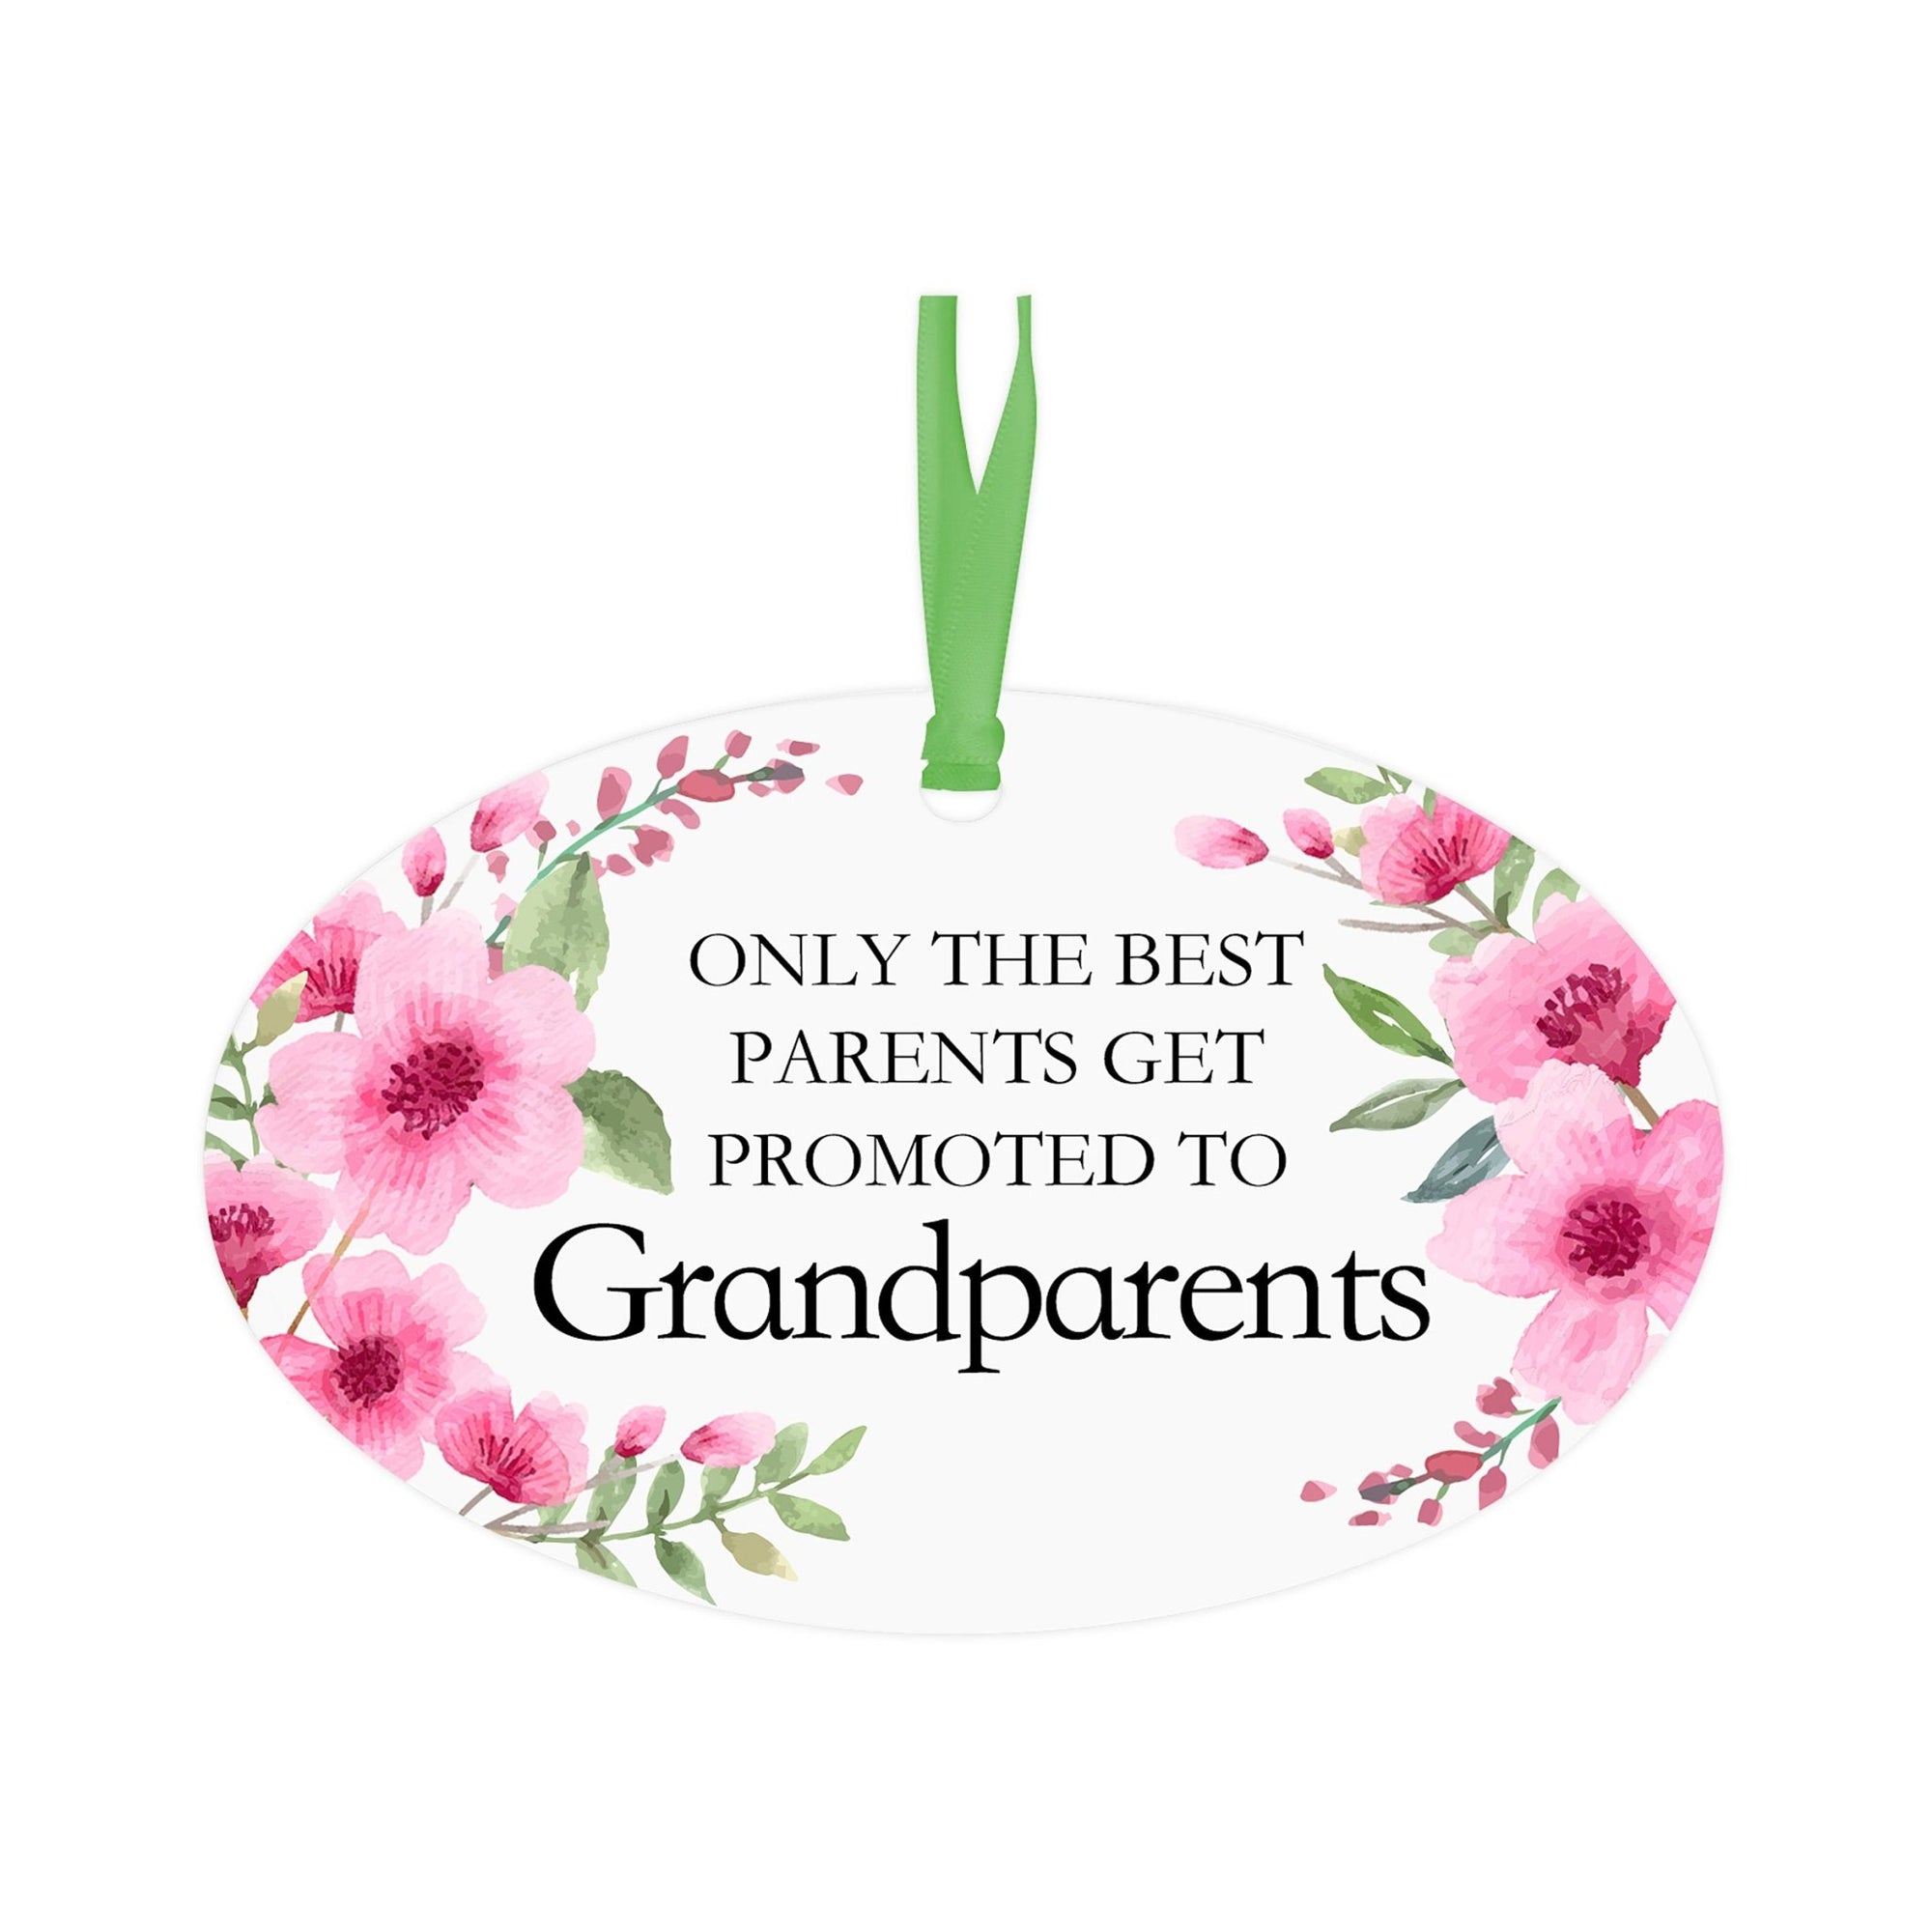 Modern 4x2.5in Christmas Wooden Oval White Ornament for Grandparents - Only the Best Parents - LifeSong Milestones